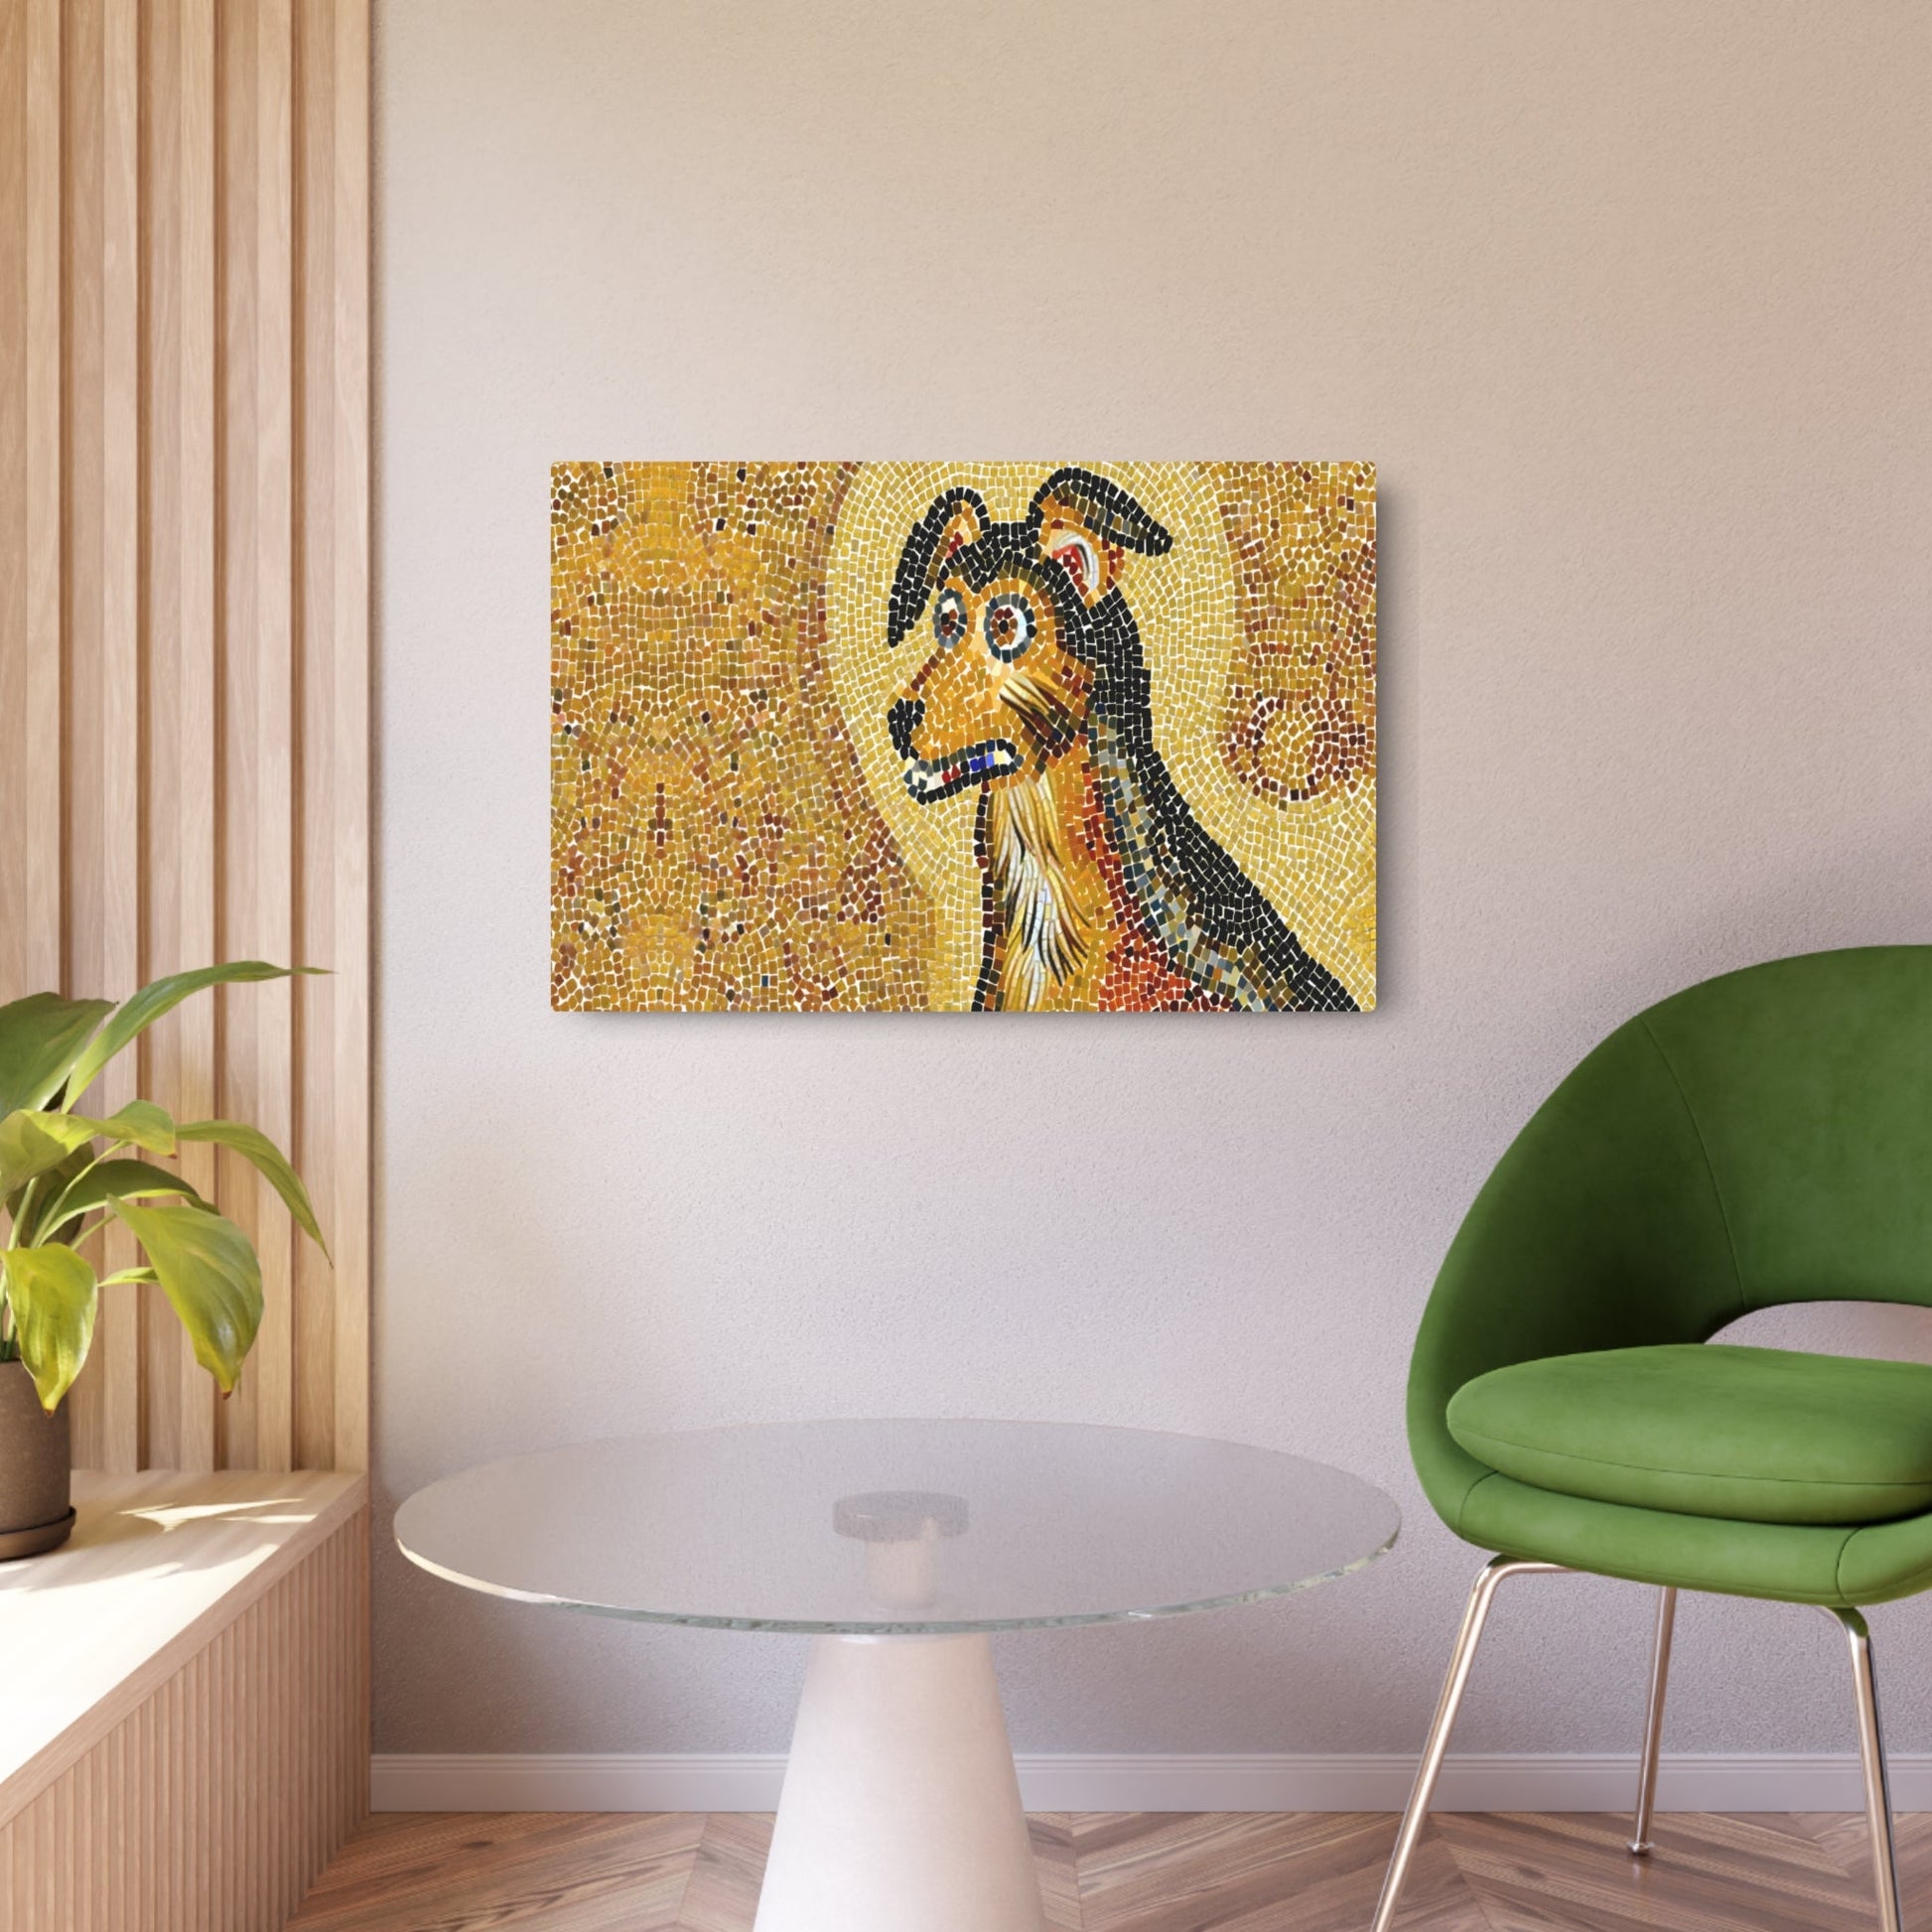 Metal Poster Art | "Byzantine Art Style Dog Image with Detailed Mosaics and Gold Backgrounds - Unique Non-Western & Global Styles Artwork" - Metal Poster Art 36″ x 24″ (Horizontal) 0.12''